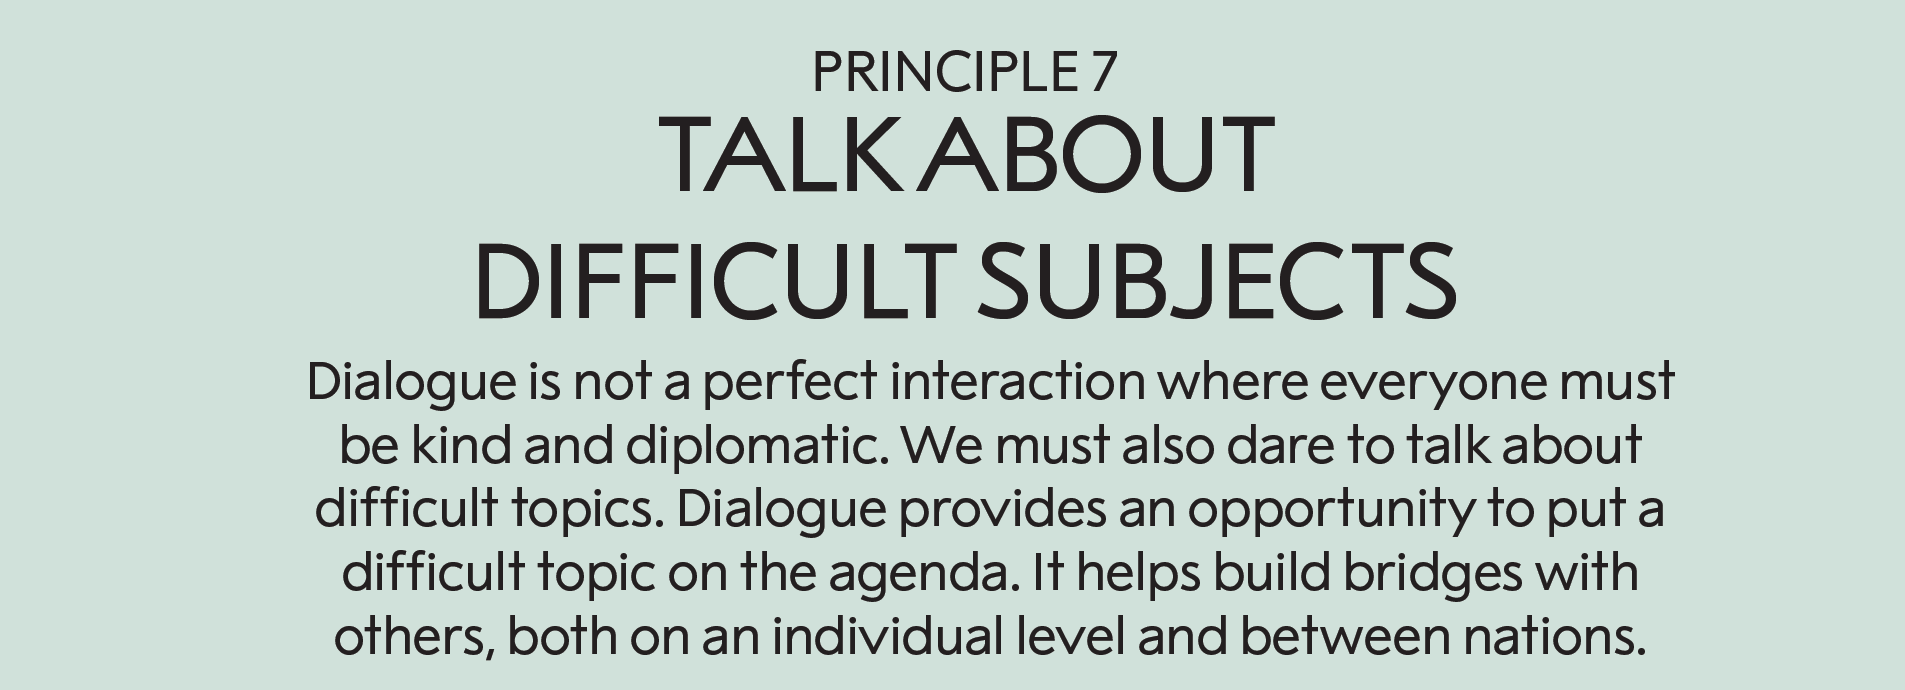 Principle 7: Talk about the difficult topics  : Dialogue is not a perfect interaction in which everyone must be kind and diplomatic. We must also dare to talk about what is difficult. Dialogue provides an opportunity to put a difficult topic on the agenda. It helps us to build bridges with others, both on an individual level and between nations. 